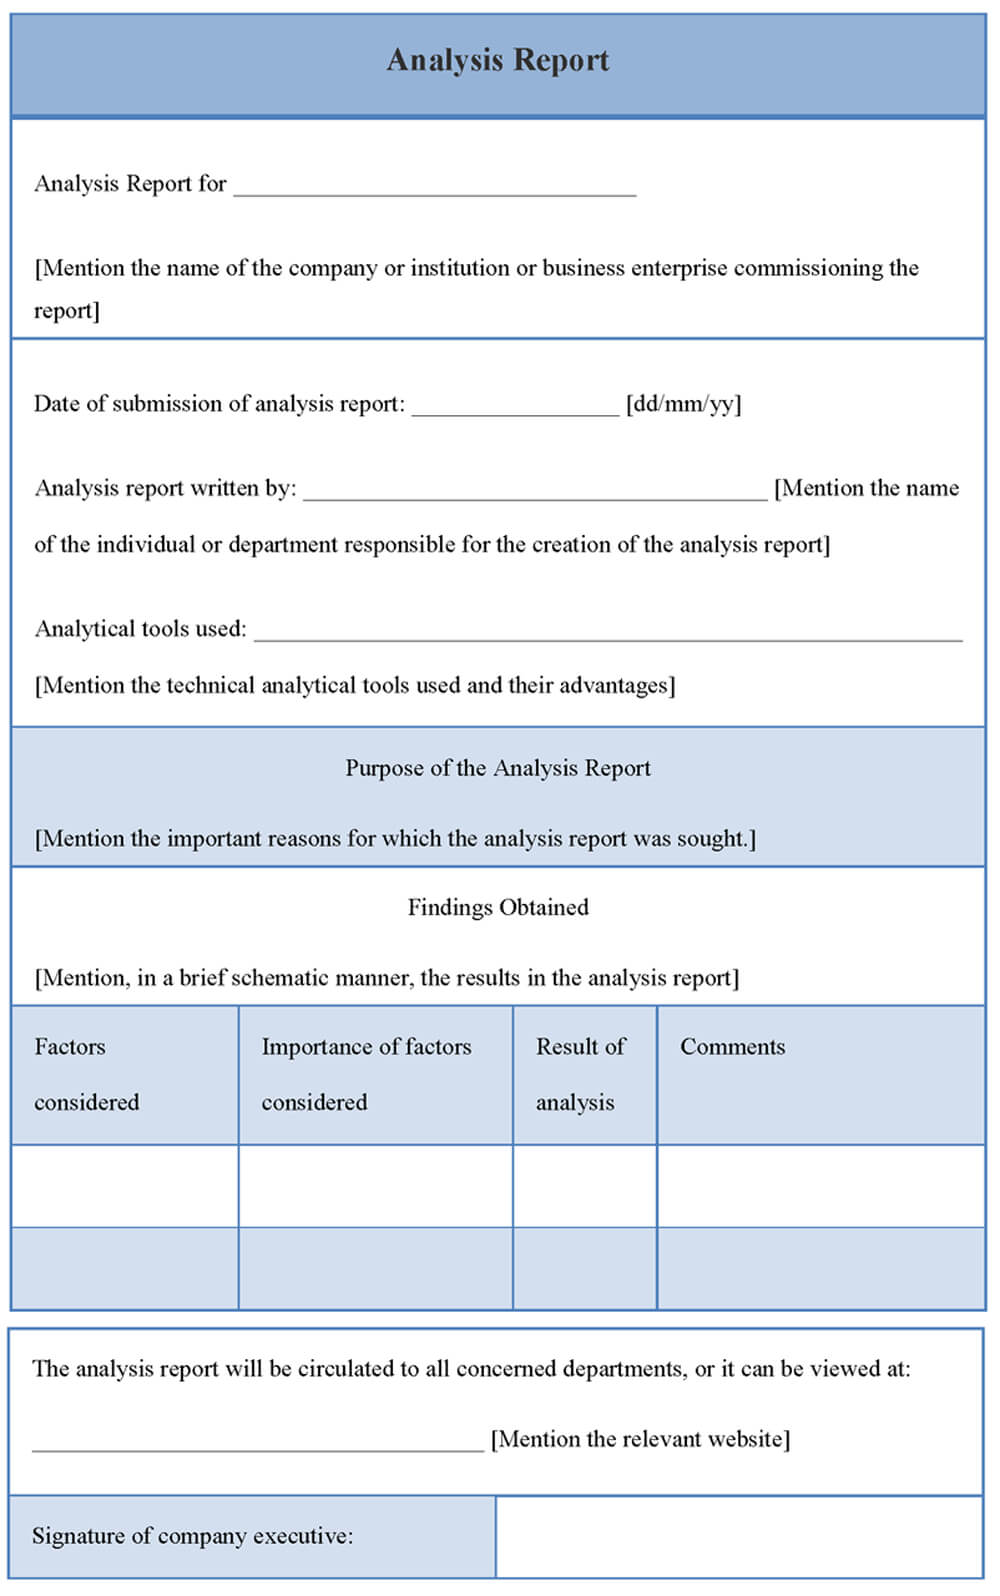 Analysis Report Template | Templates | Report Template Throughout Analytical Report Template